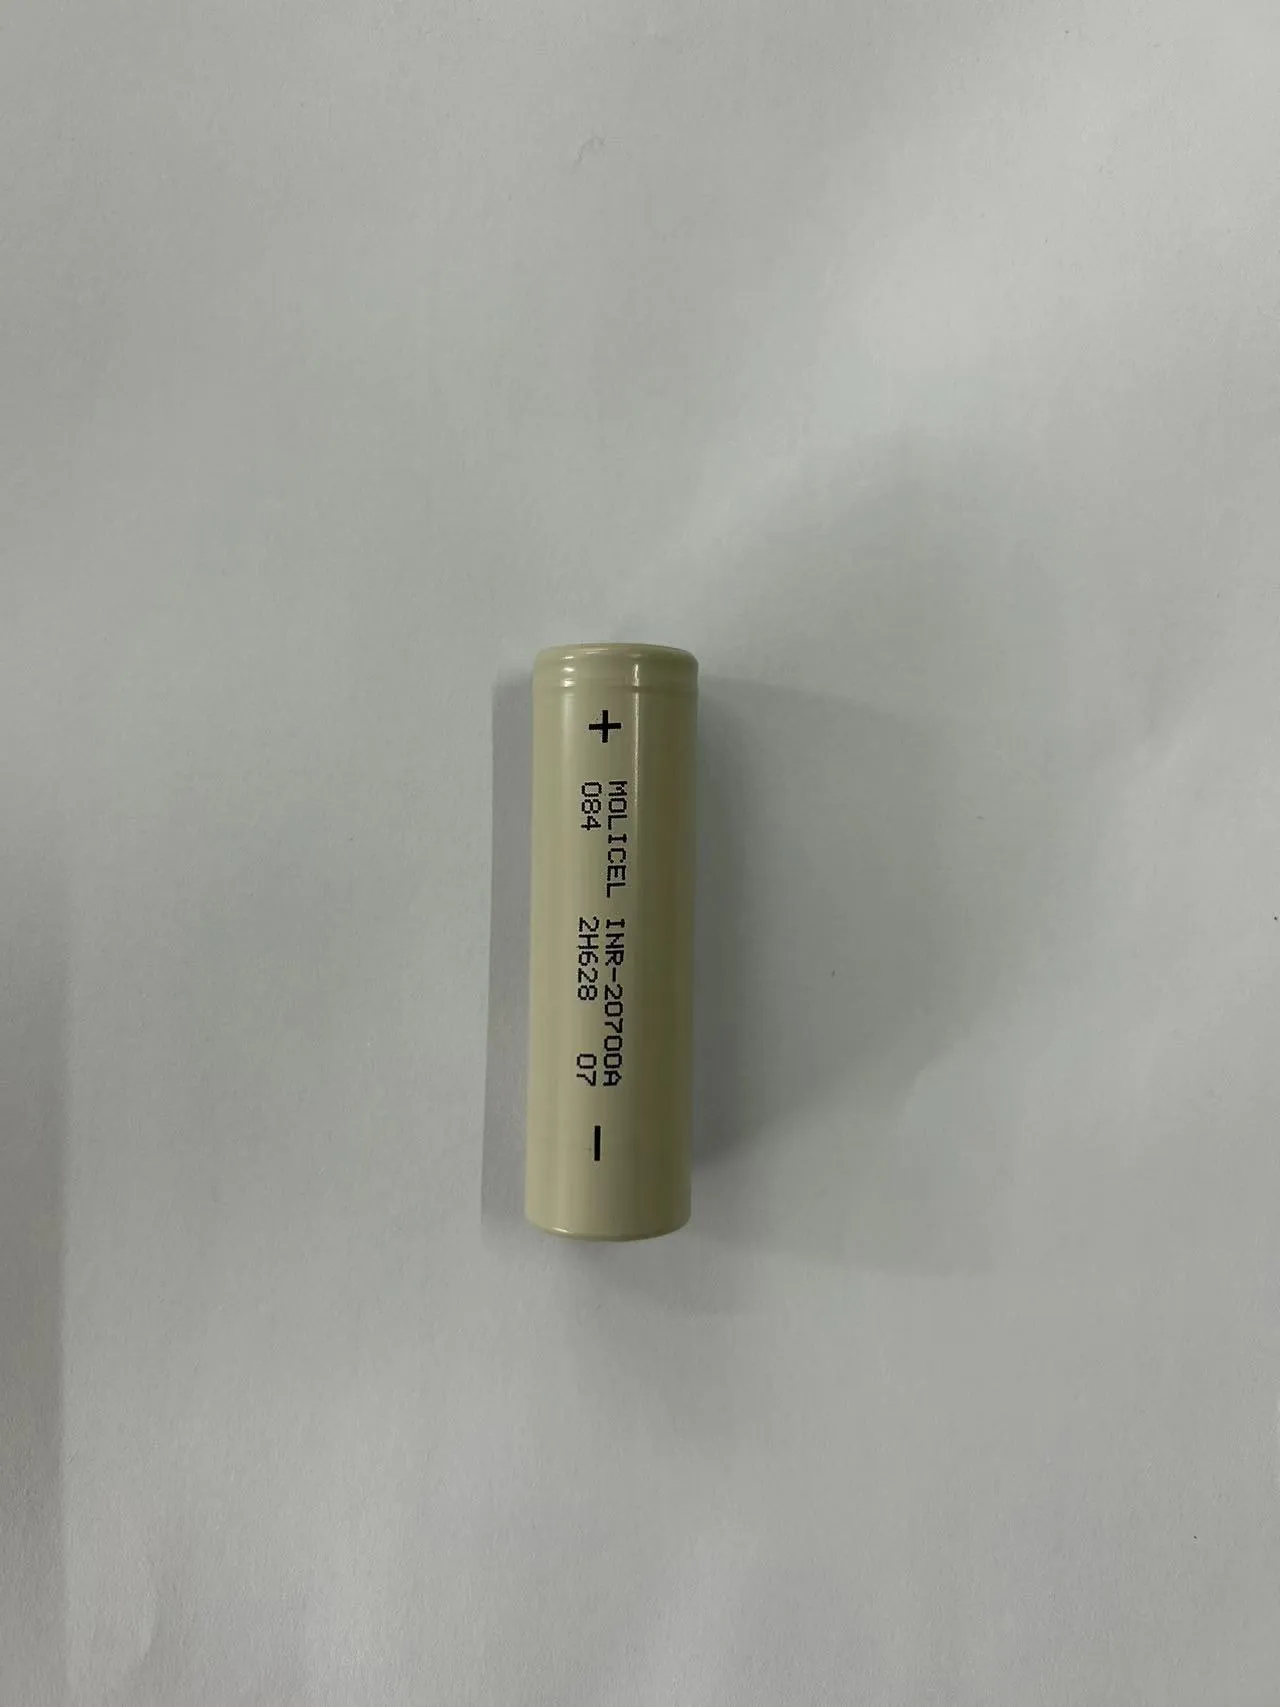 New Top Quality MOLICEL INR-20700A INR20700 20700A Battery 3000mAh 3.7V Lithium Batteries